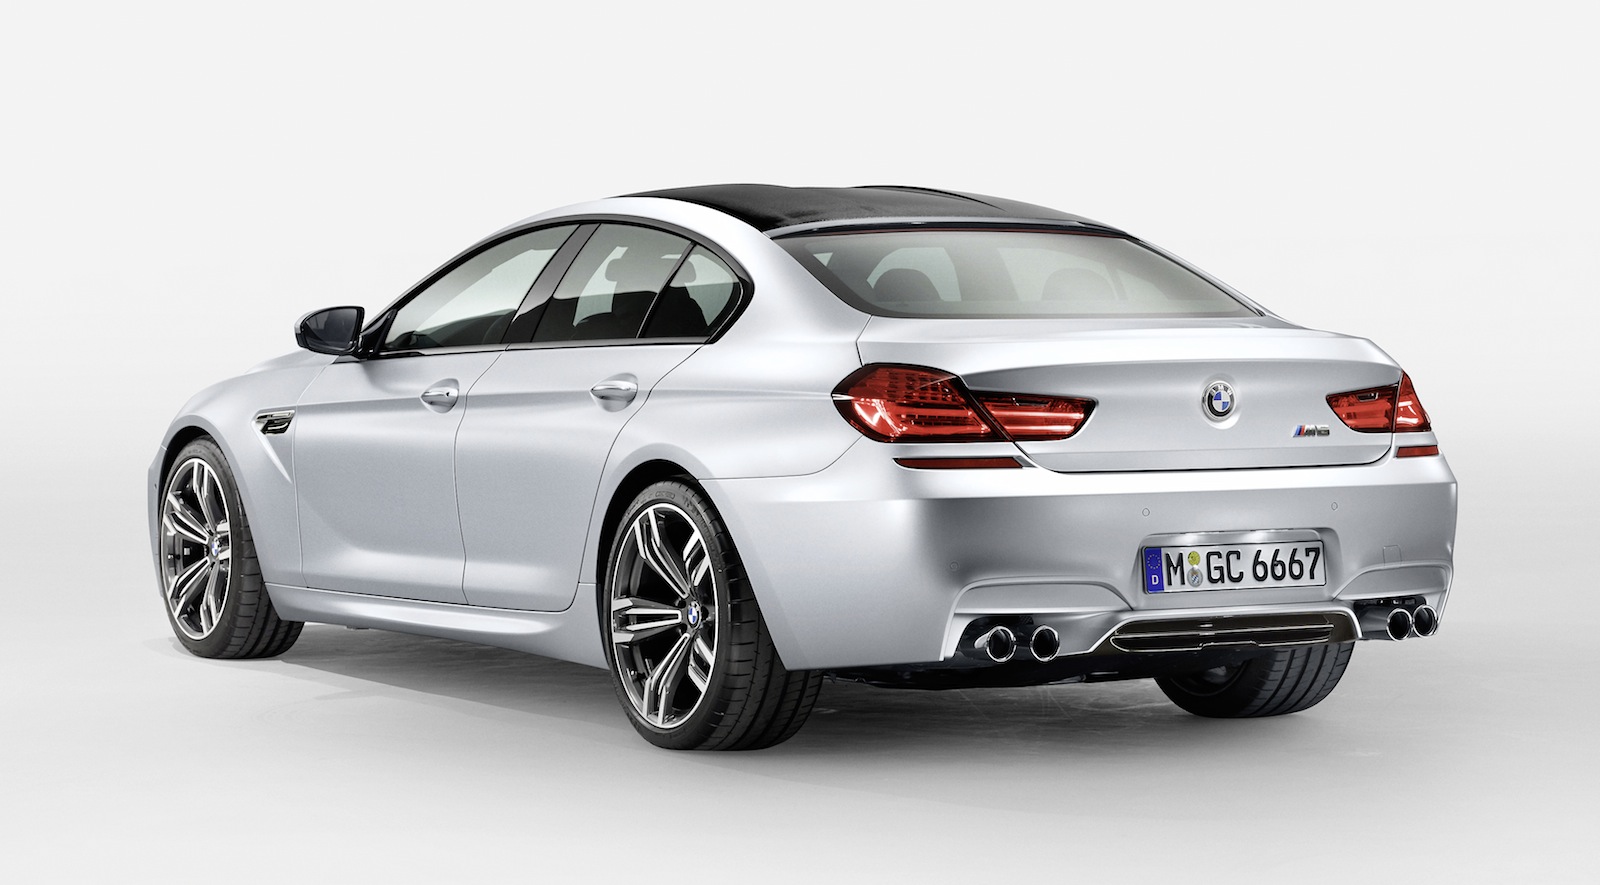 2013 BMW M6 Gran Coupe: 412kW four-door 'coupe' unveiled